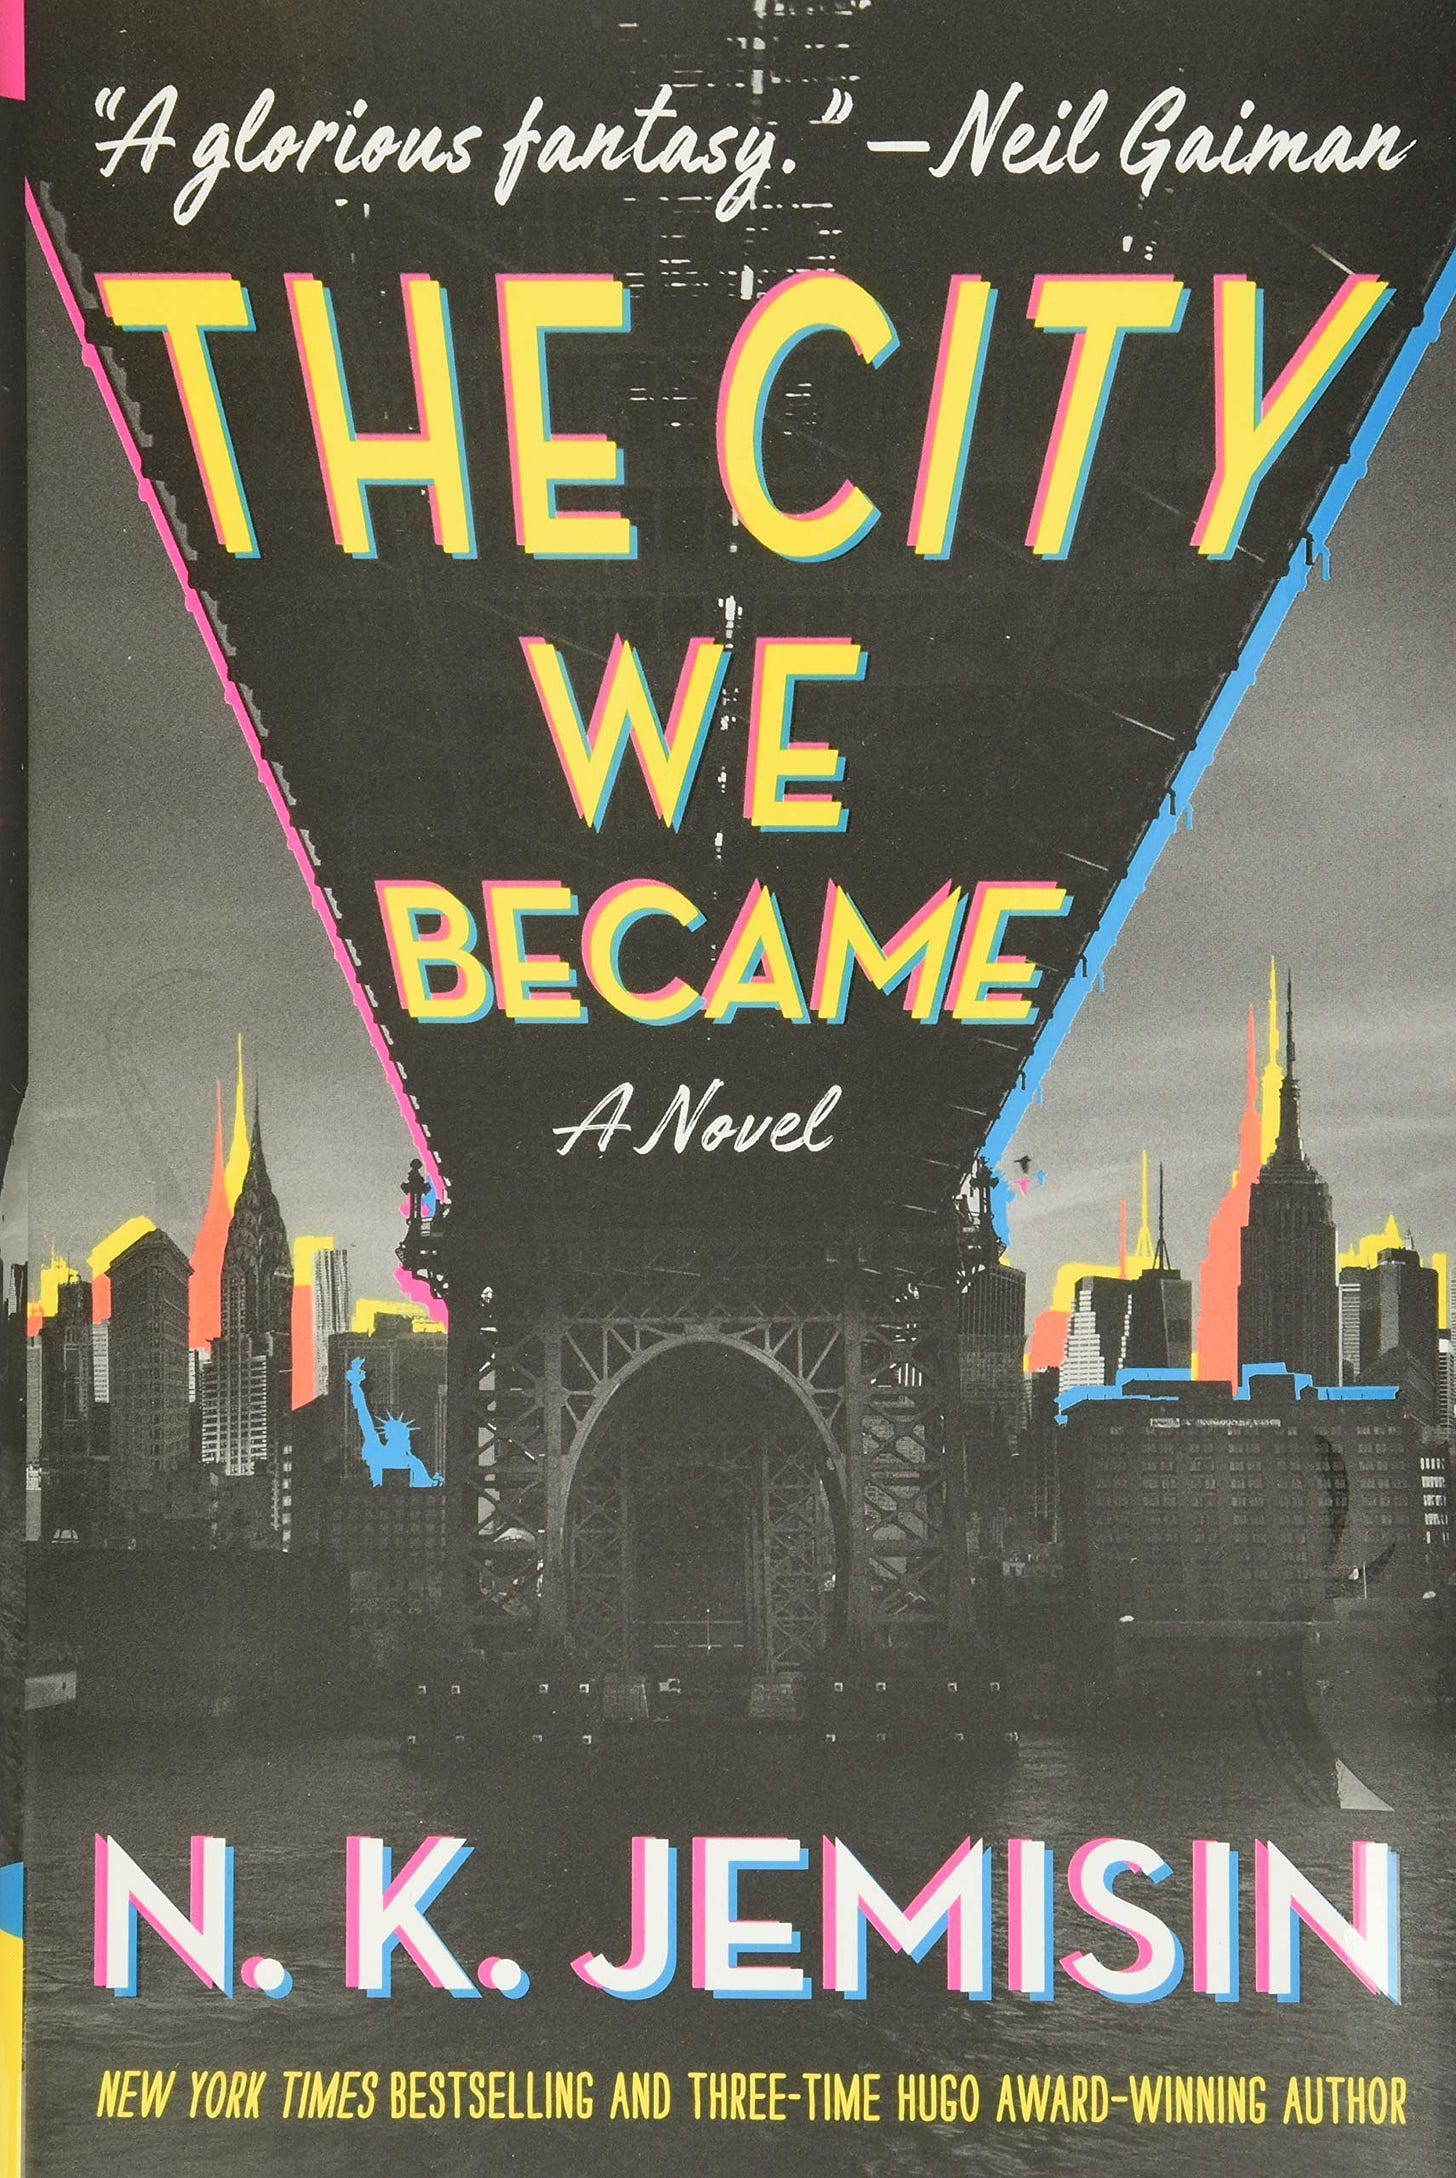 The cover of "The City We Became" which includes an image of New York City from under a bridge, with everything black and white and the edges color-shifted to have yellow features with pink and blue around the edges.